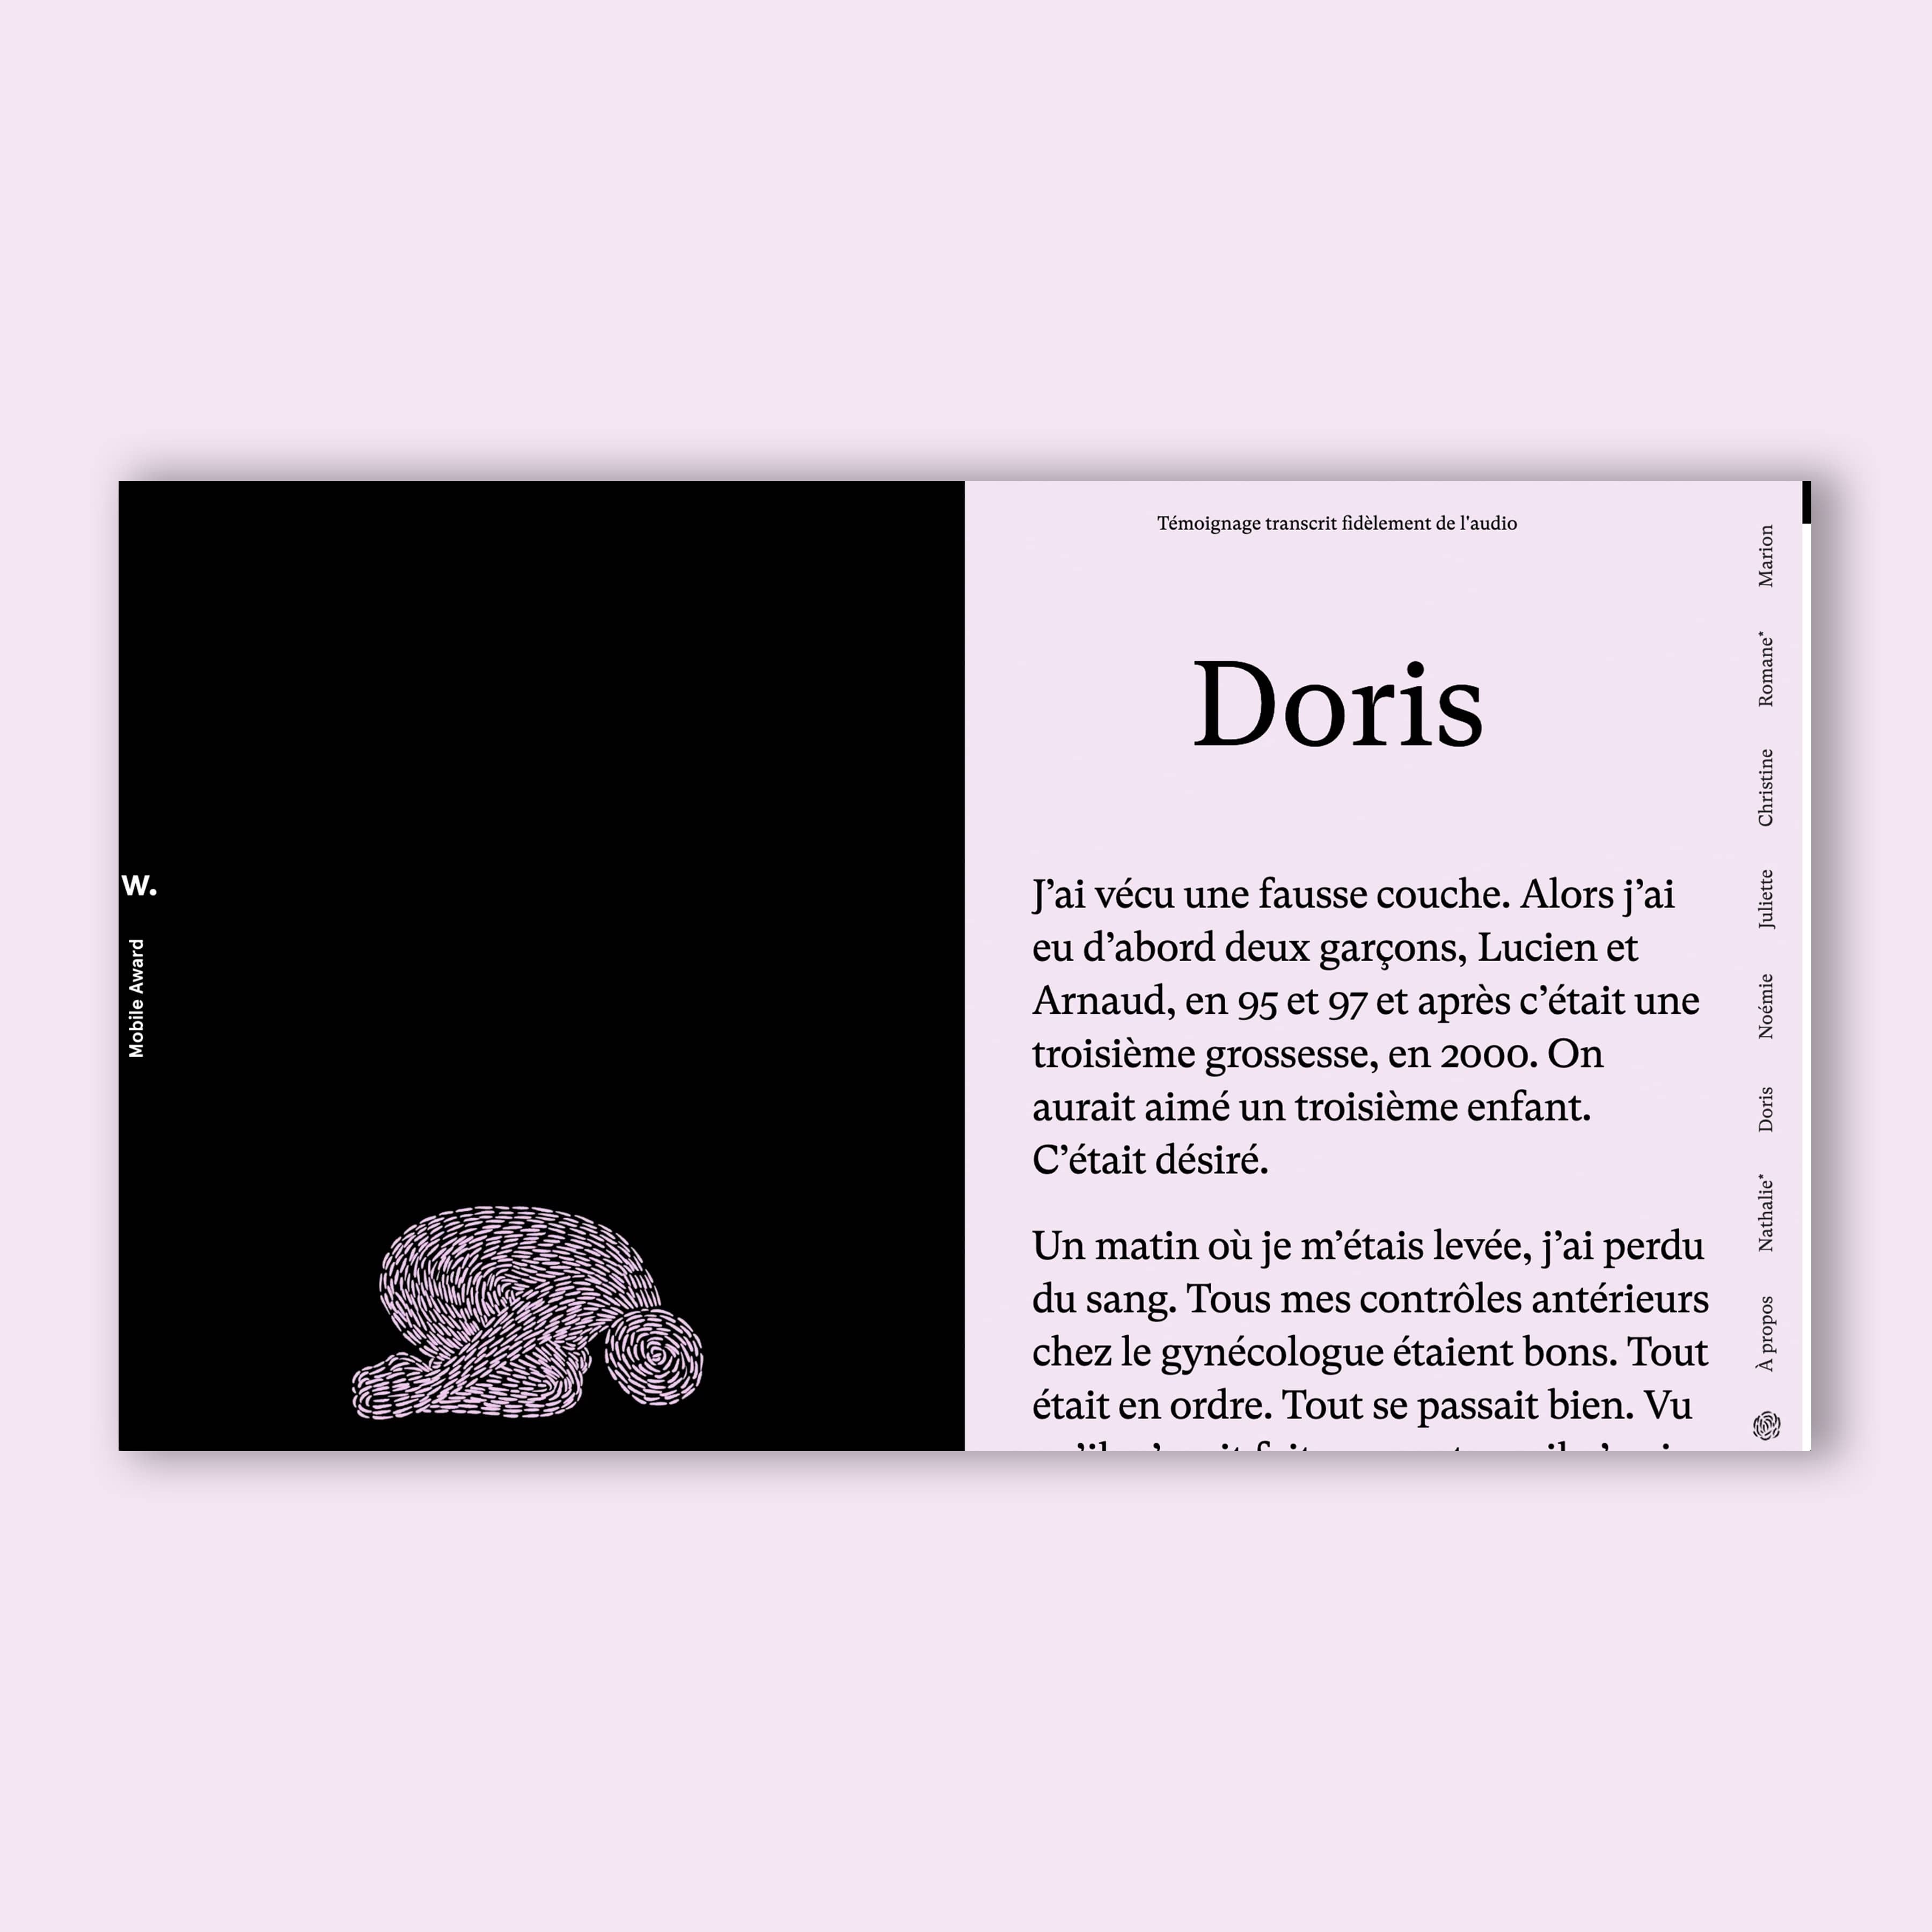 Page of the interview of Doris.